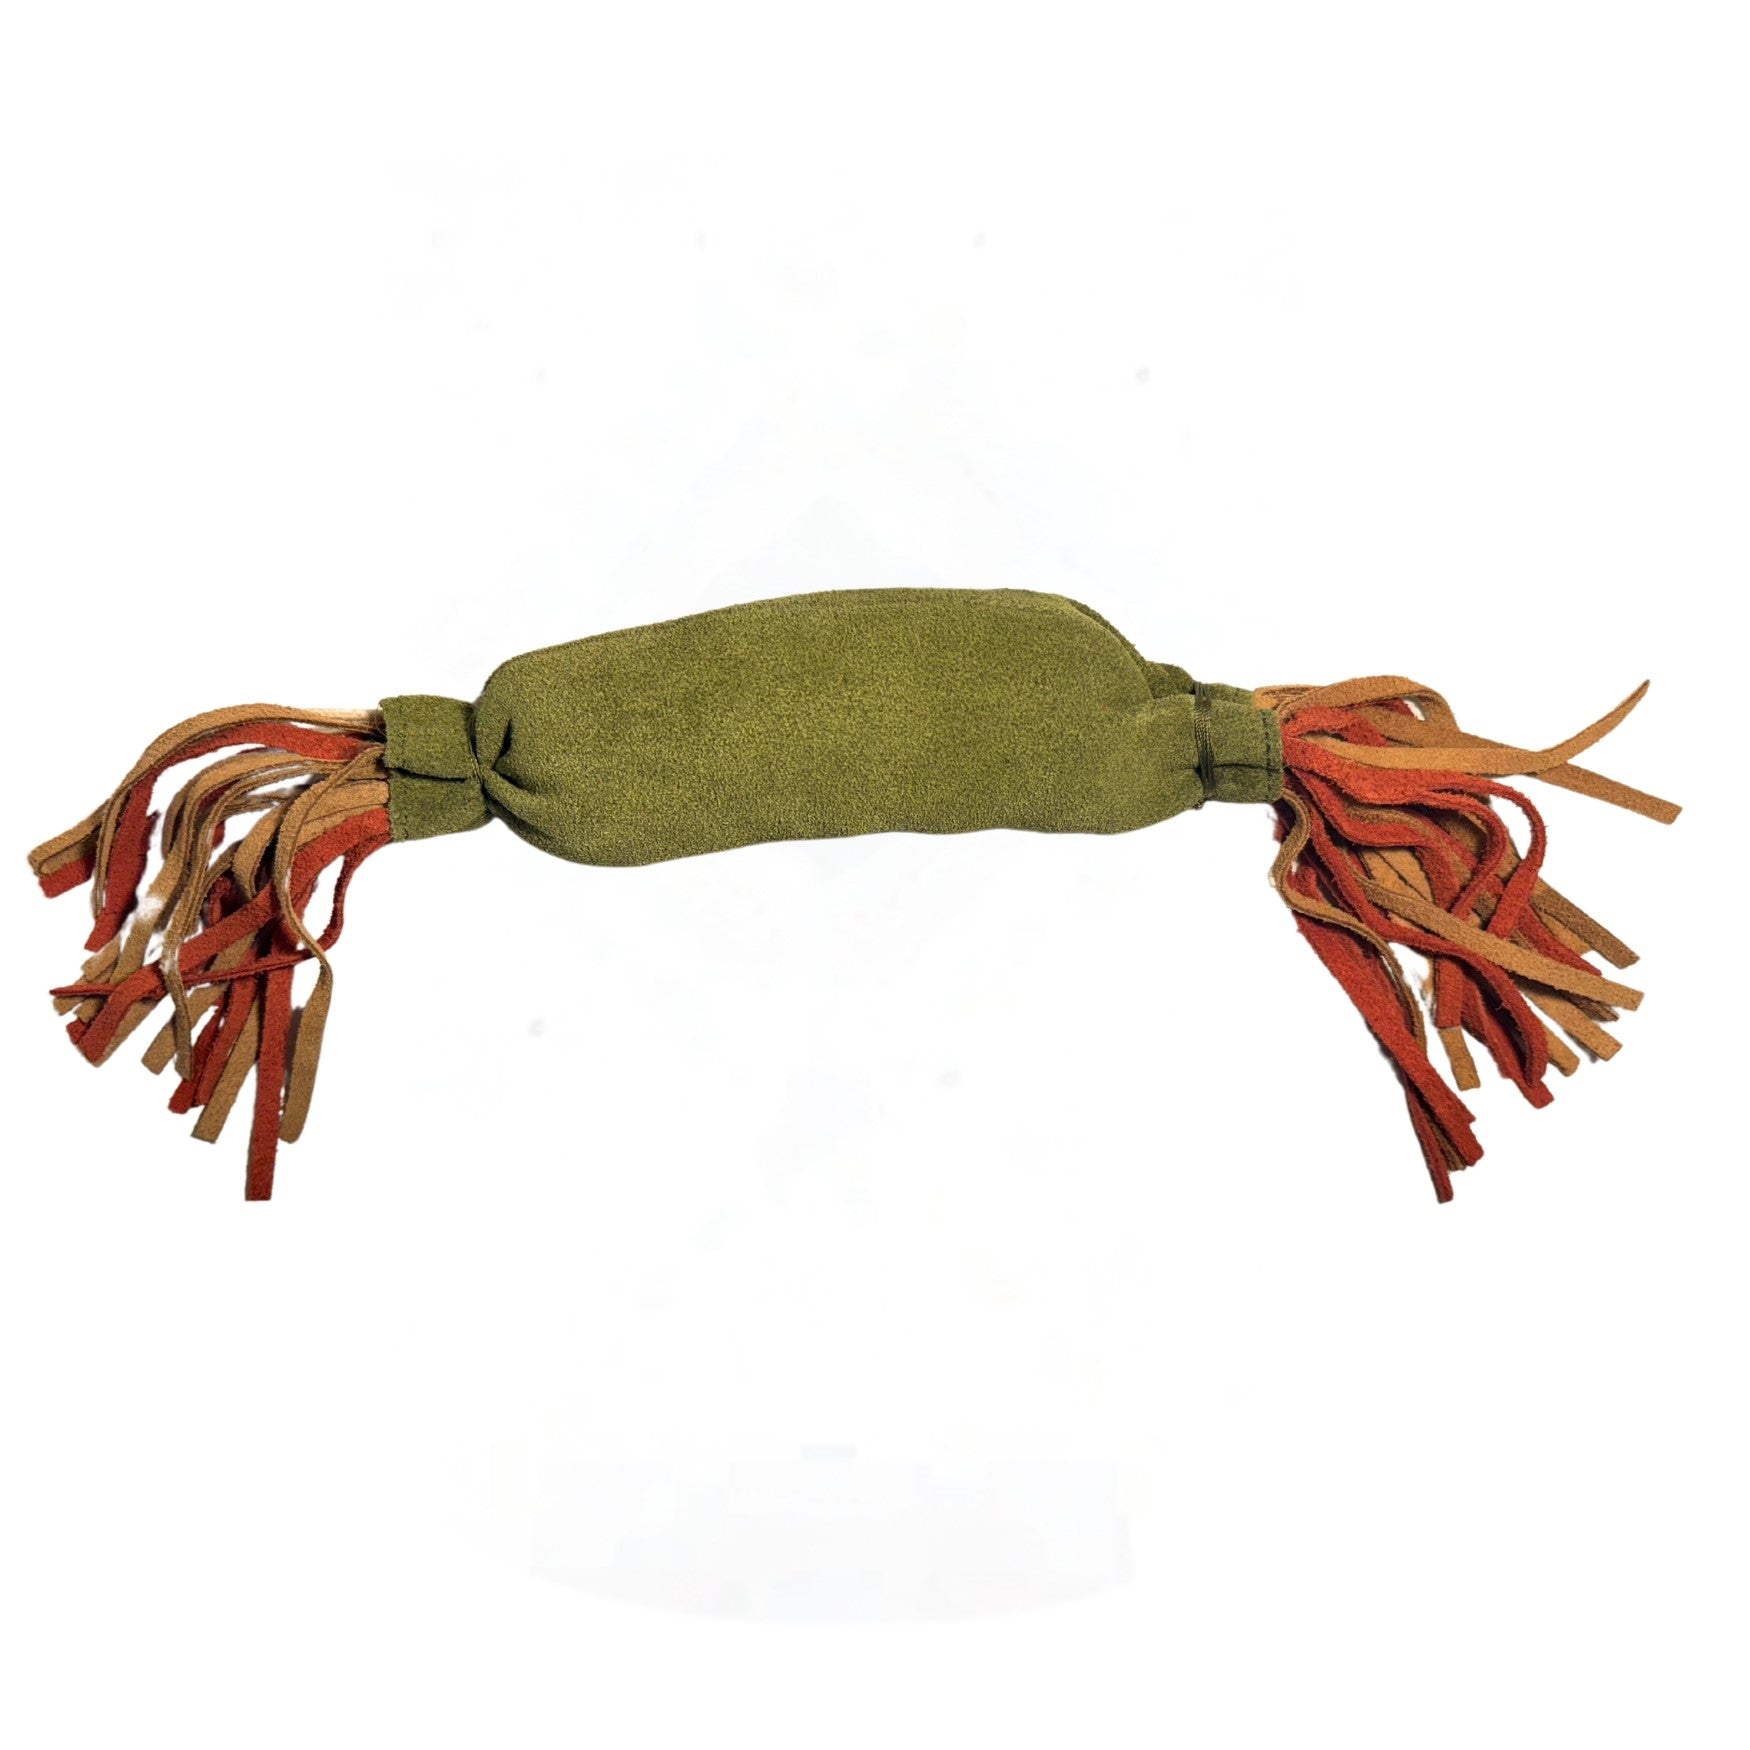 Sizzling Sausage - spinnach from Georgie Paws wrapped tightly into a cylindrical shape with fridges of red and orange fabric at both ends, resembling a traditional Native American medicine bundle, isolated on a white background.